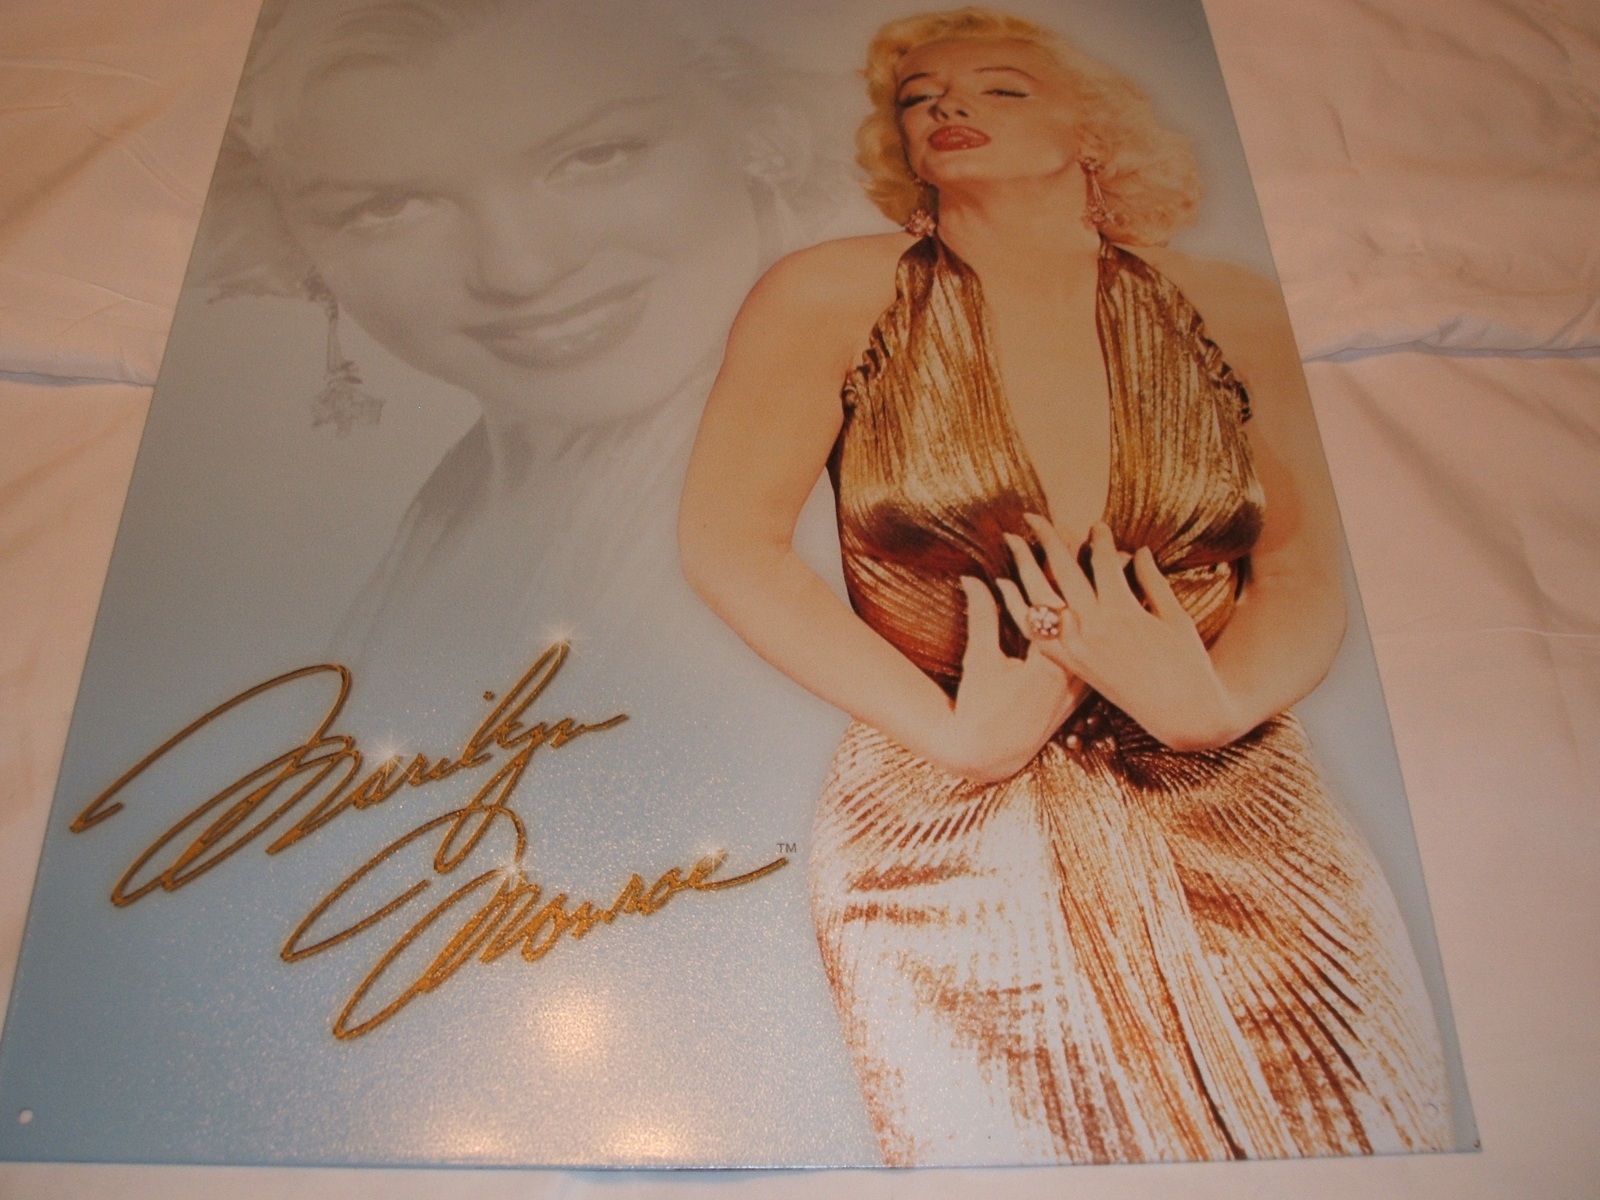 OLD VTG Marilyn Monroe pictures on a tin metal sign - $30.00